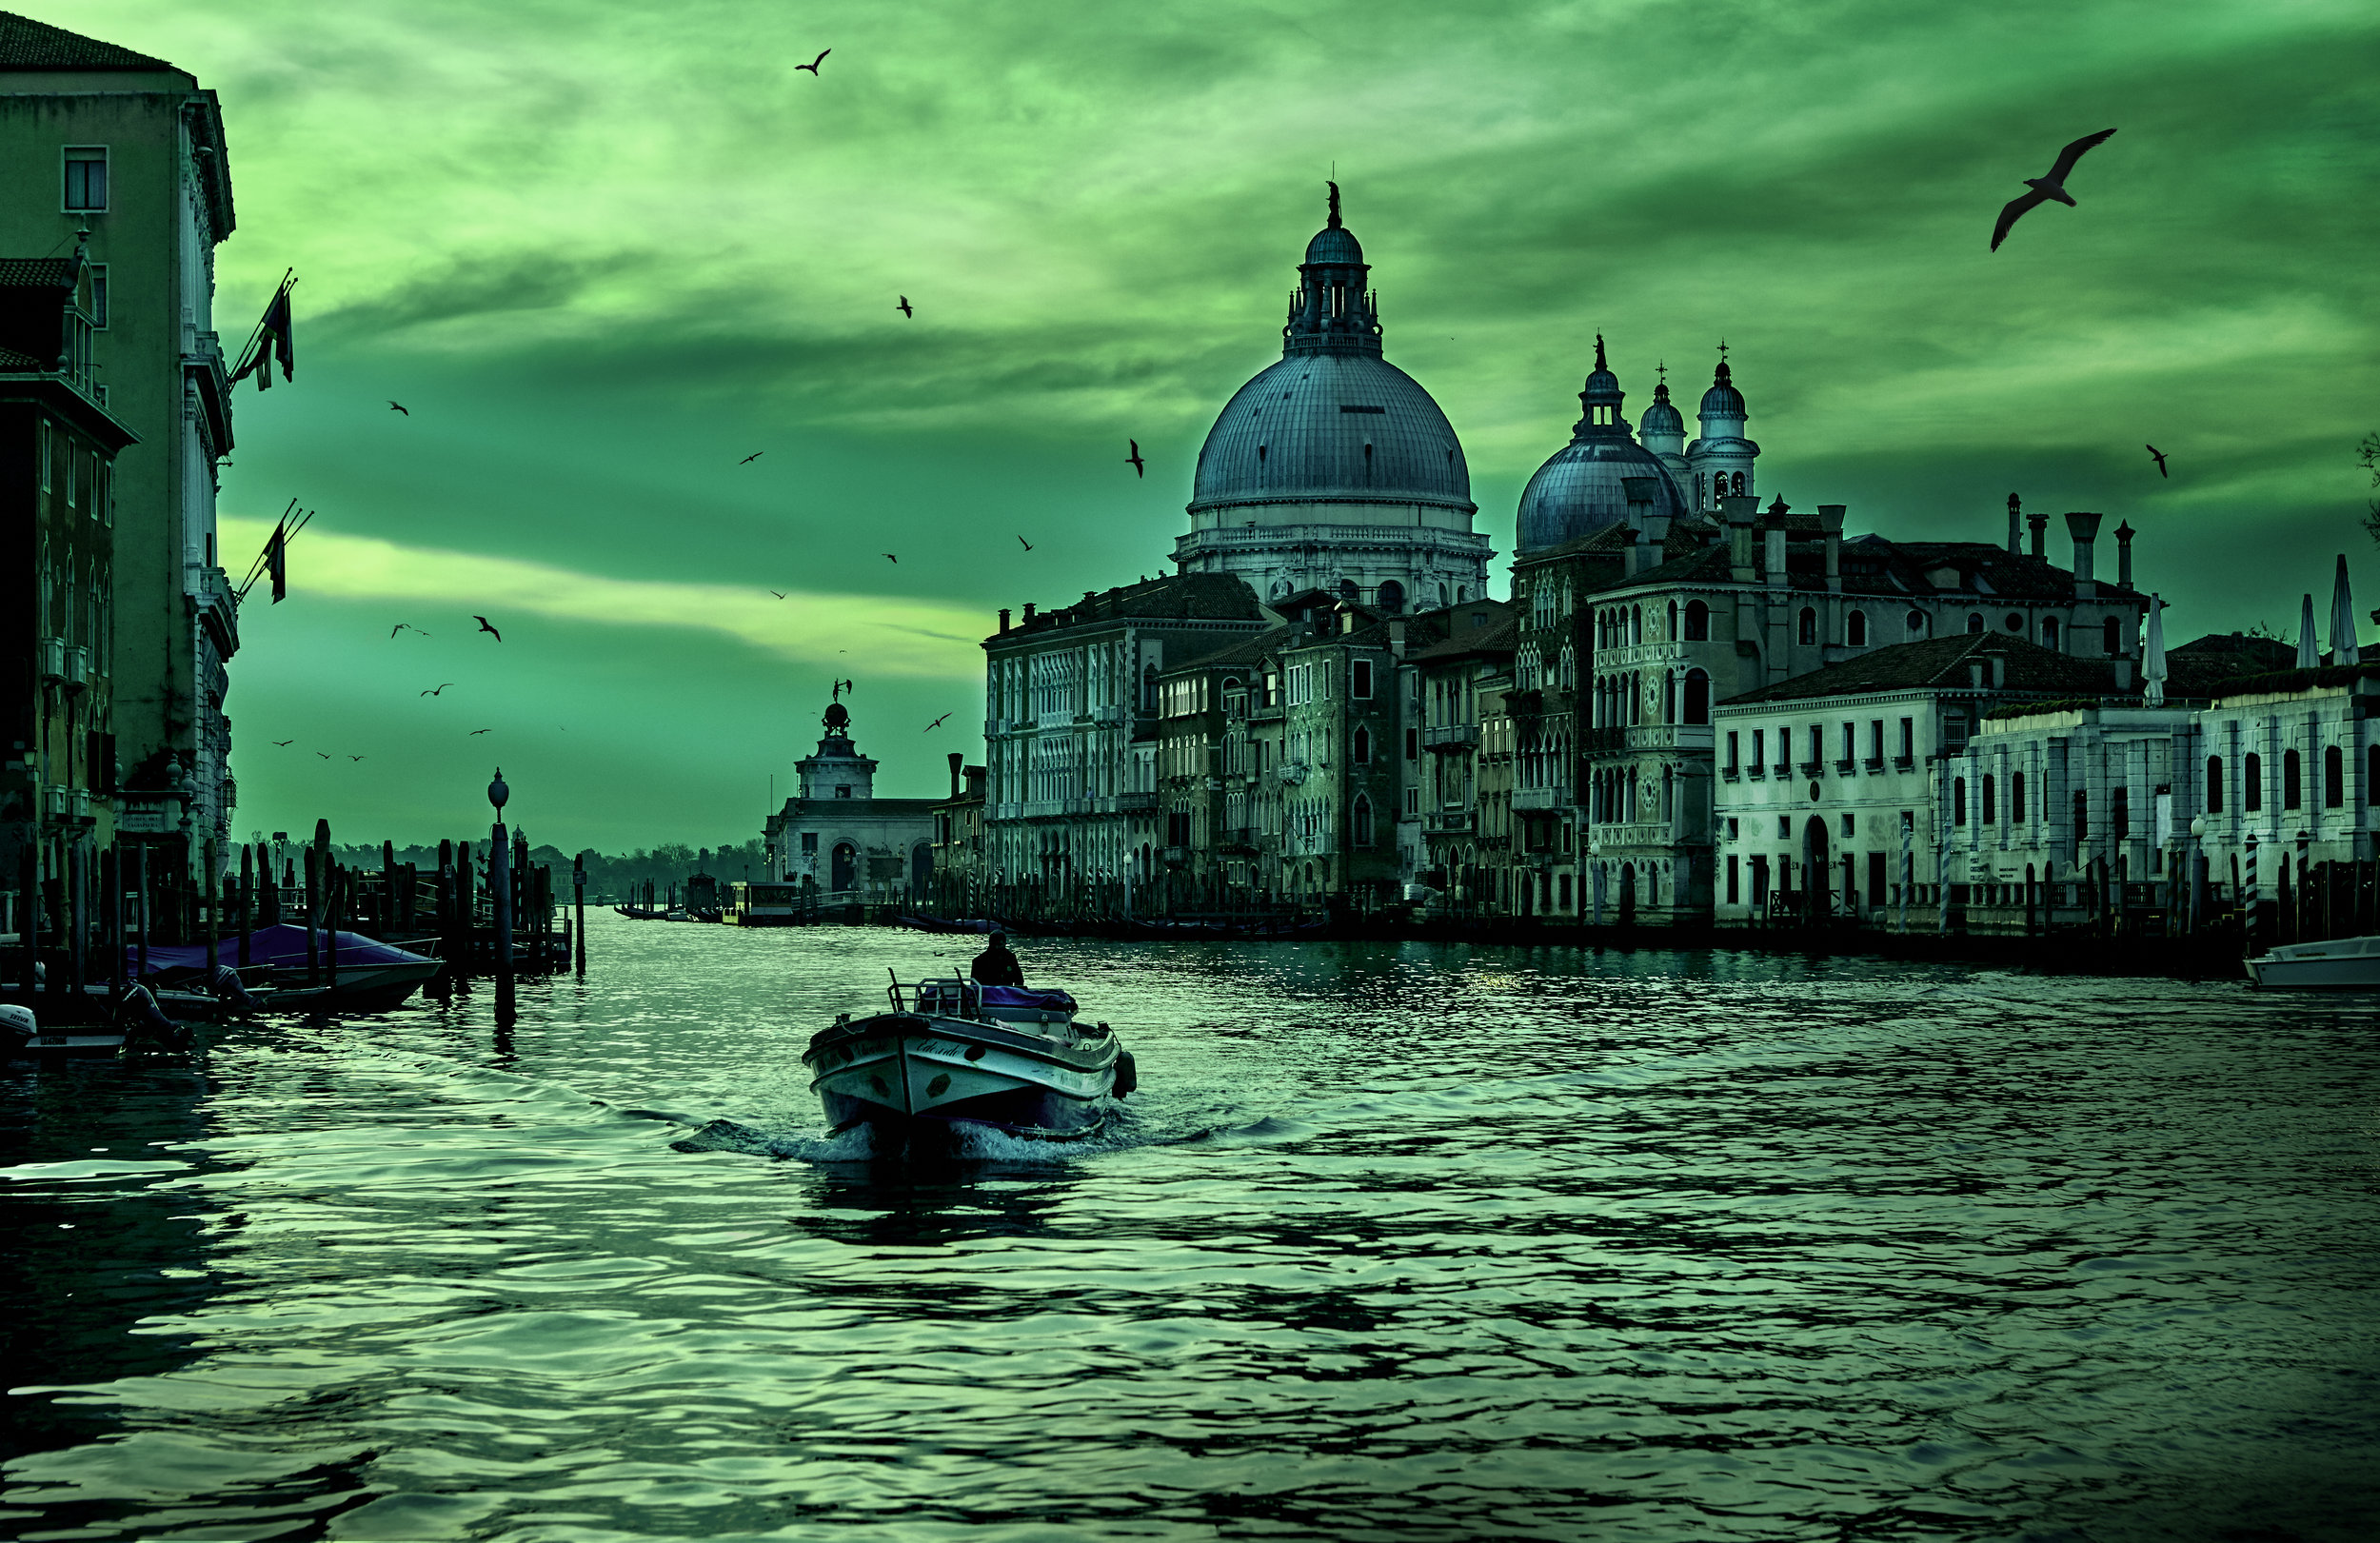 Venice Italy_Canal Boat View_0541.jpg